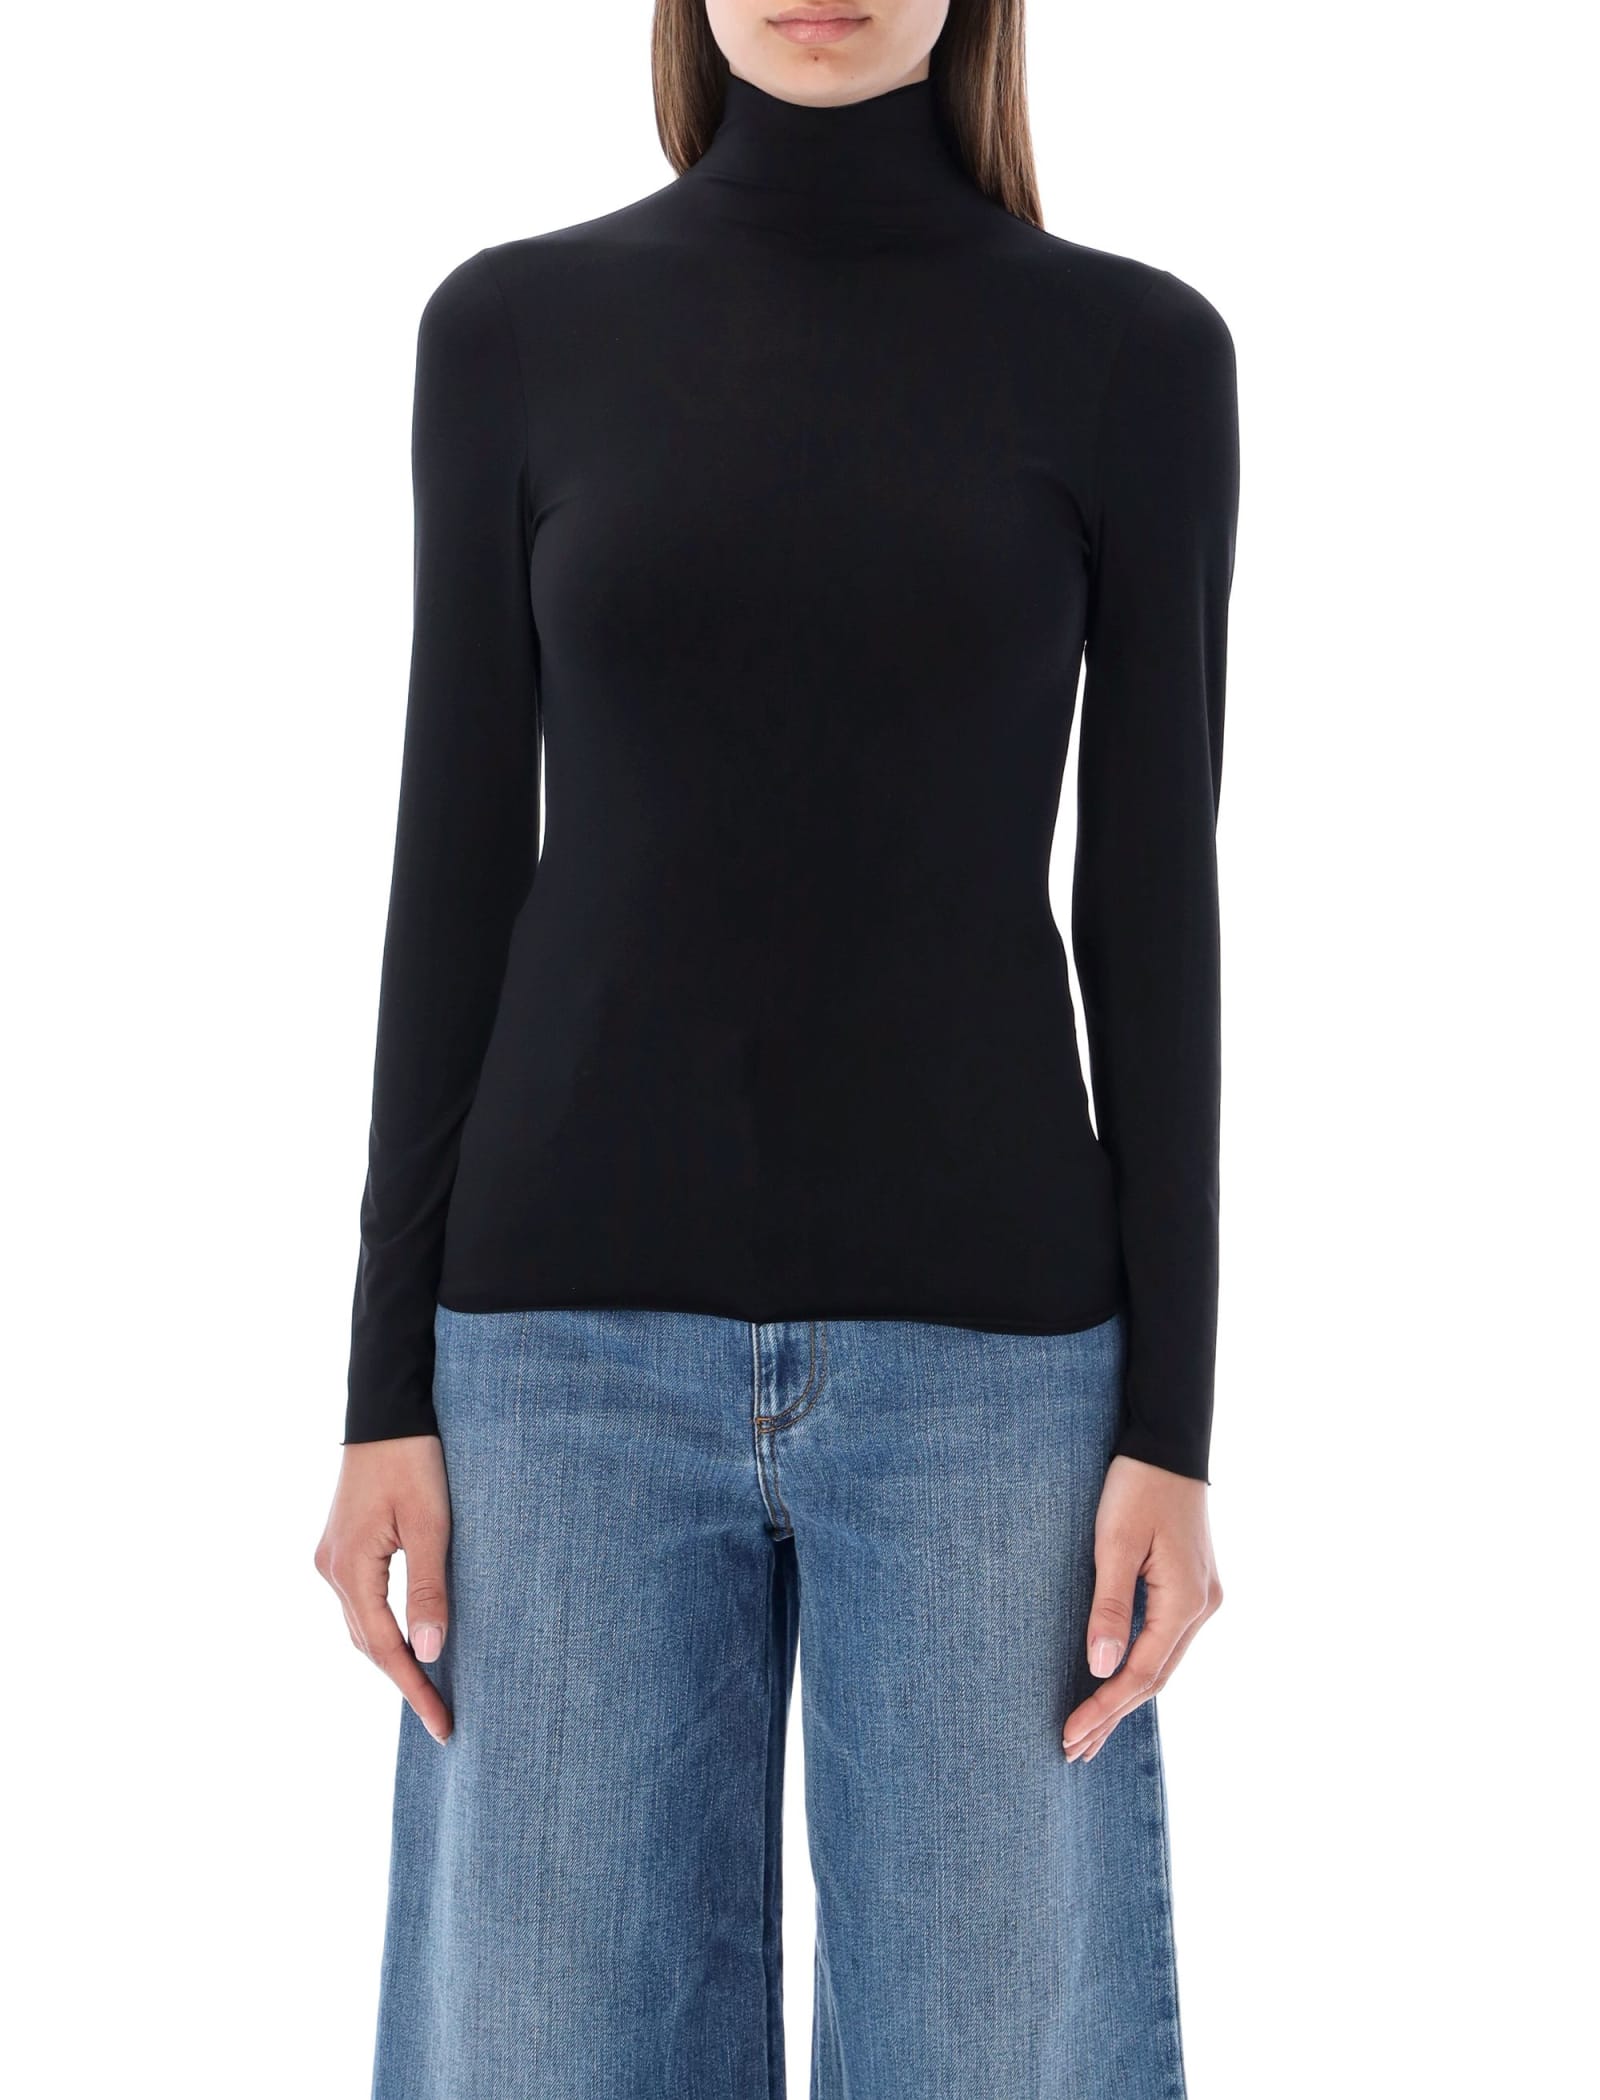 TORY BURCH TURTLE NECK TOP